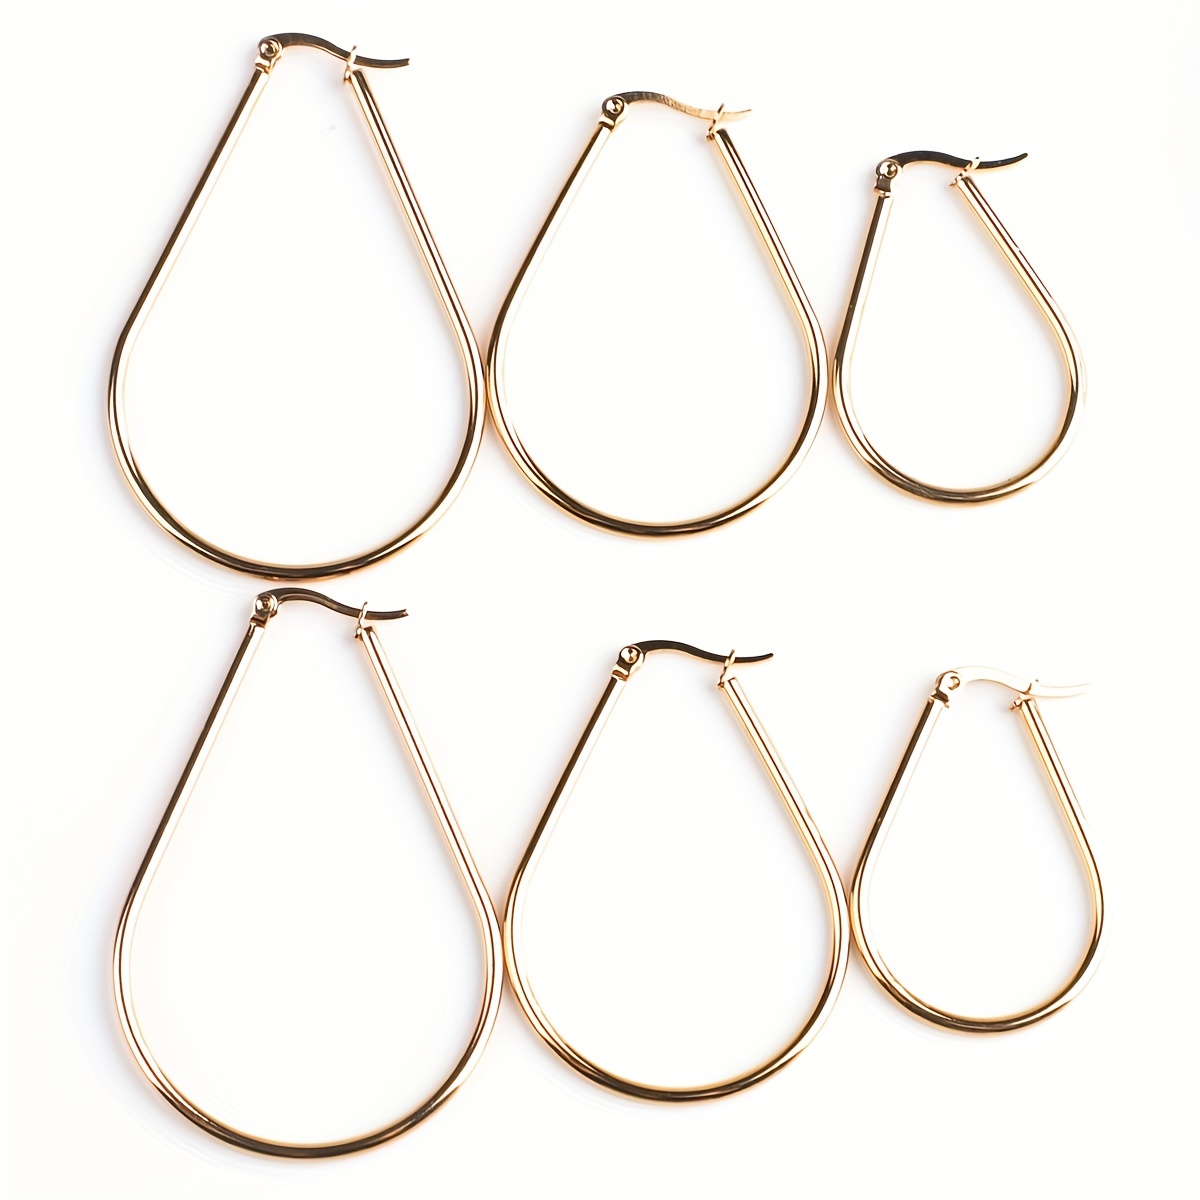 

3 Pairs Of Hypoallergenic Golden Stainless Steel Water Drop Earrings - Perfect Gift For Women & Girls!